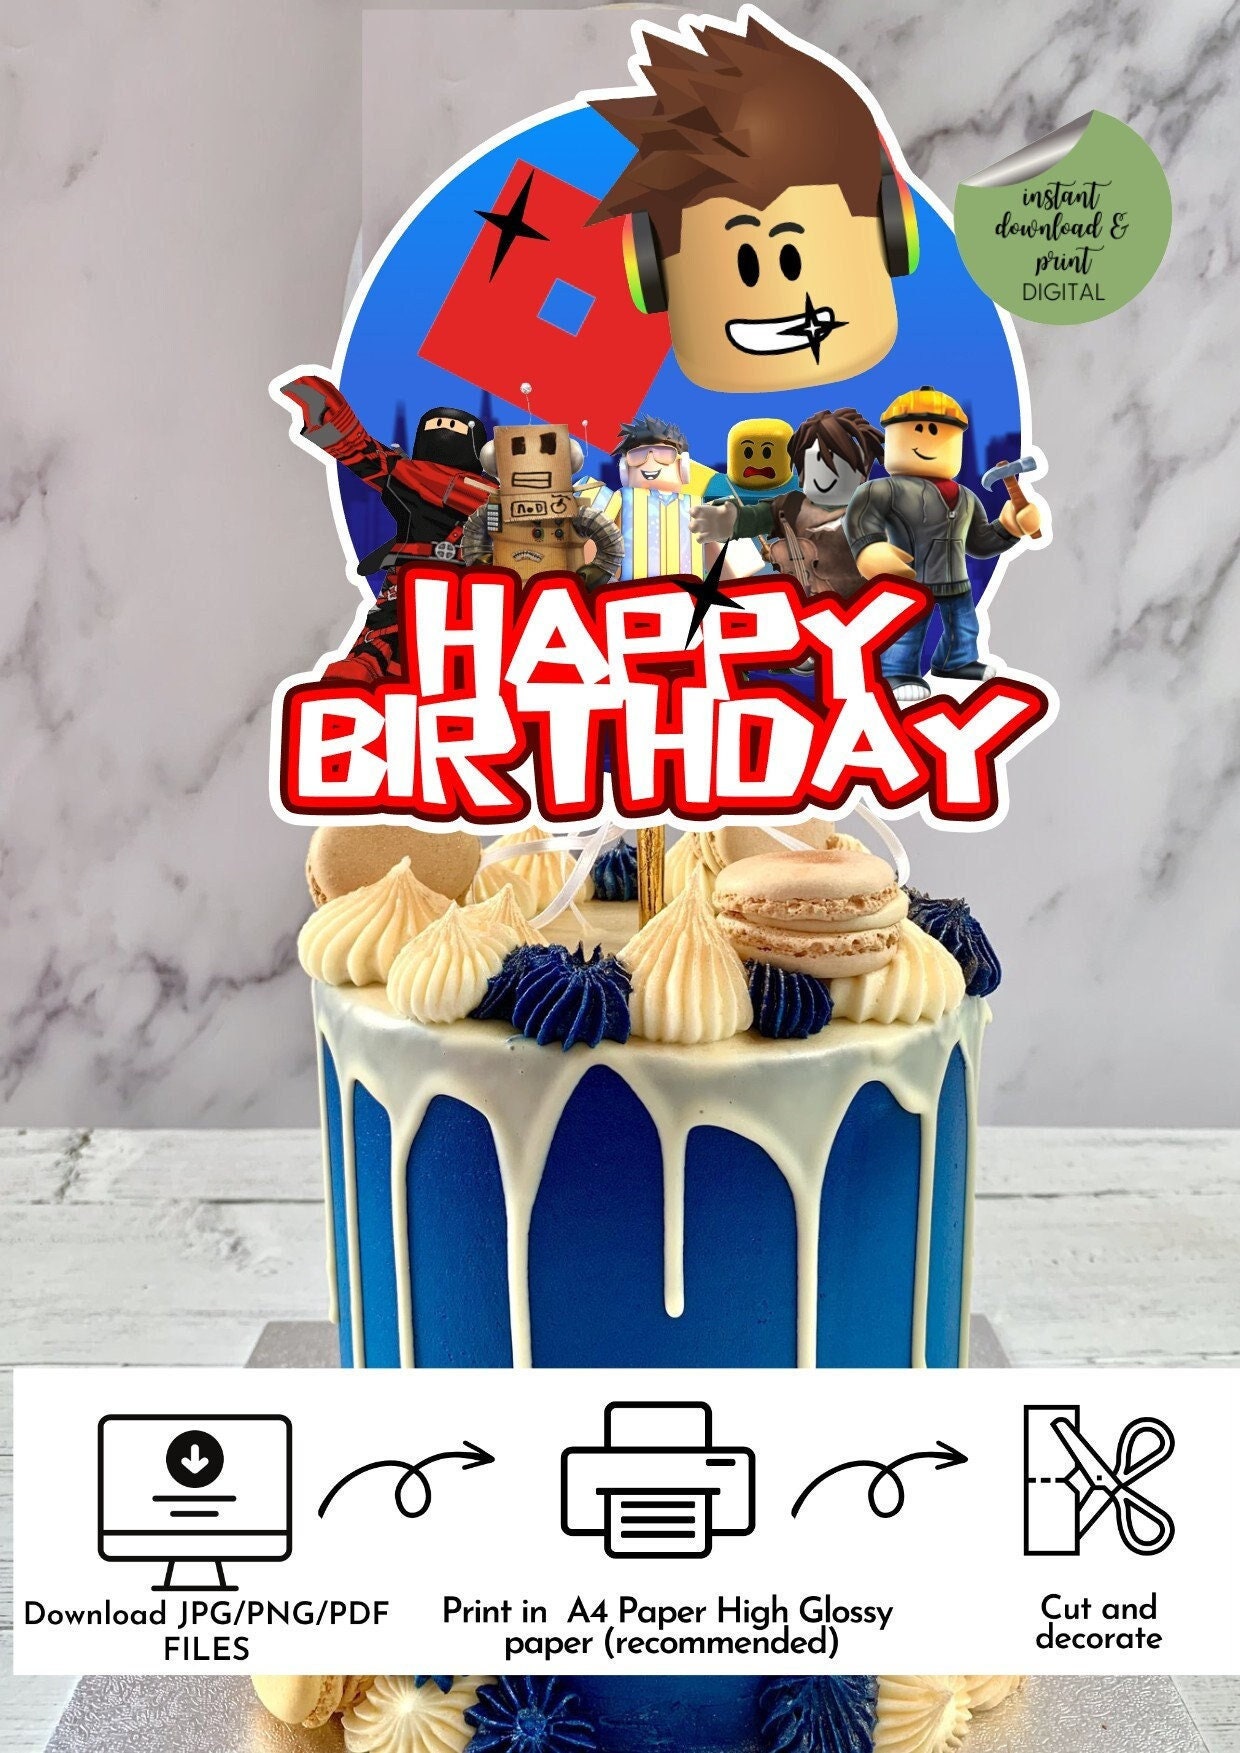 Free Roblox Cake Topper Template - Download in Illustrator, EPS, SVG, JPG,  PNG